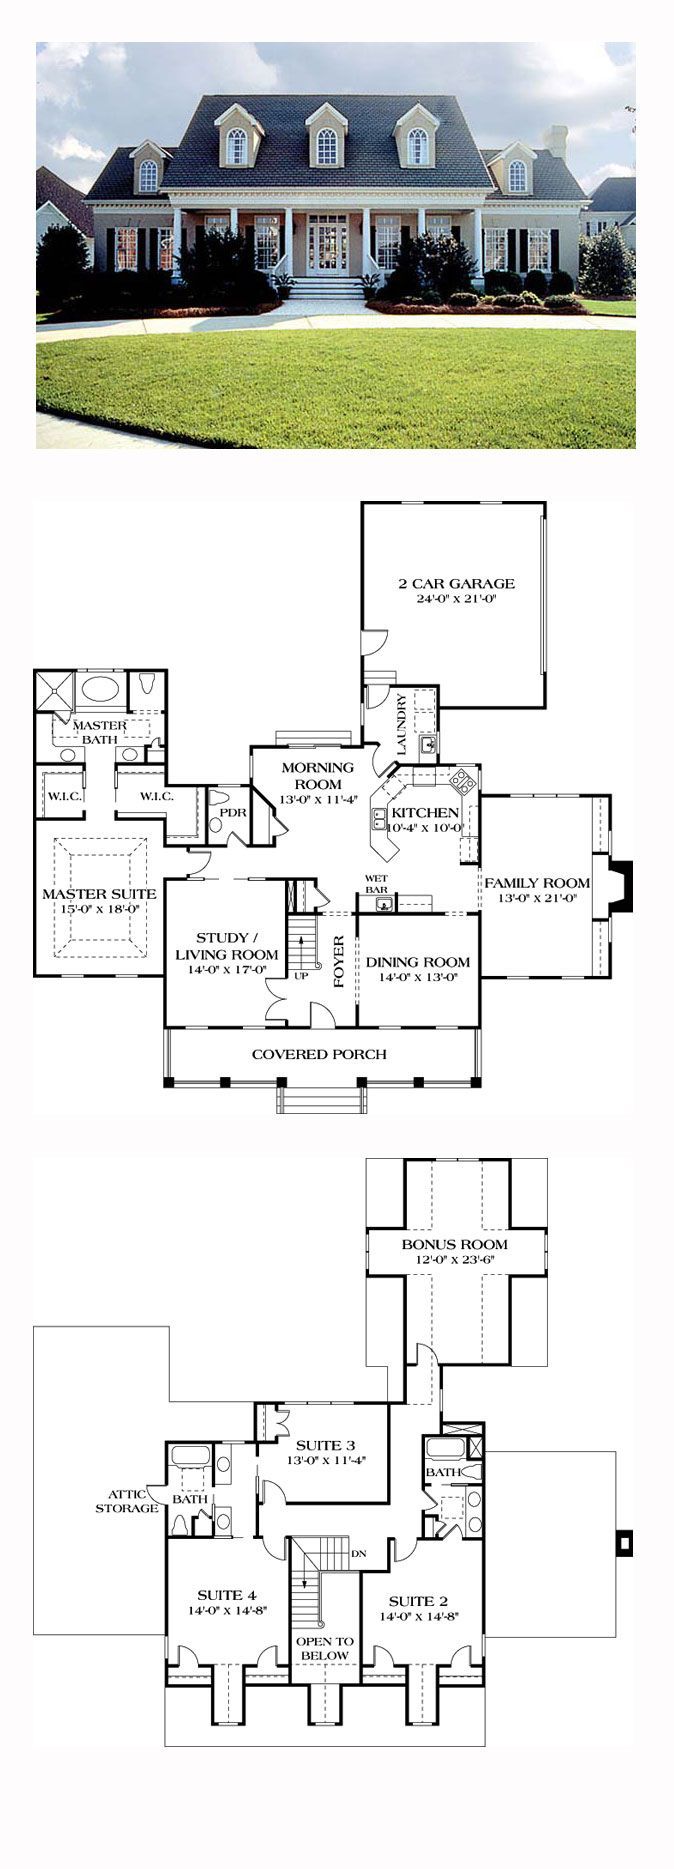 Plans Maison En Photos 2018 Country House Plan 85454 Total Living Area 3338 Sq. Ft. 4 Bedrooms And 3.5 B 